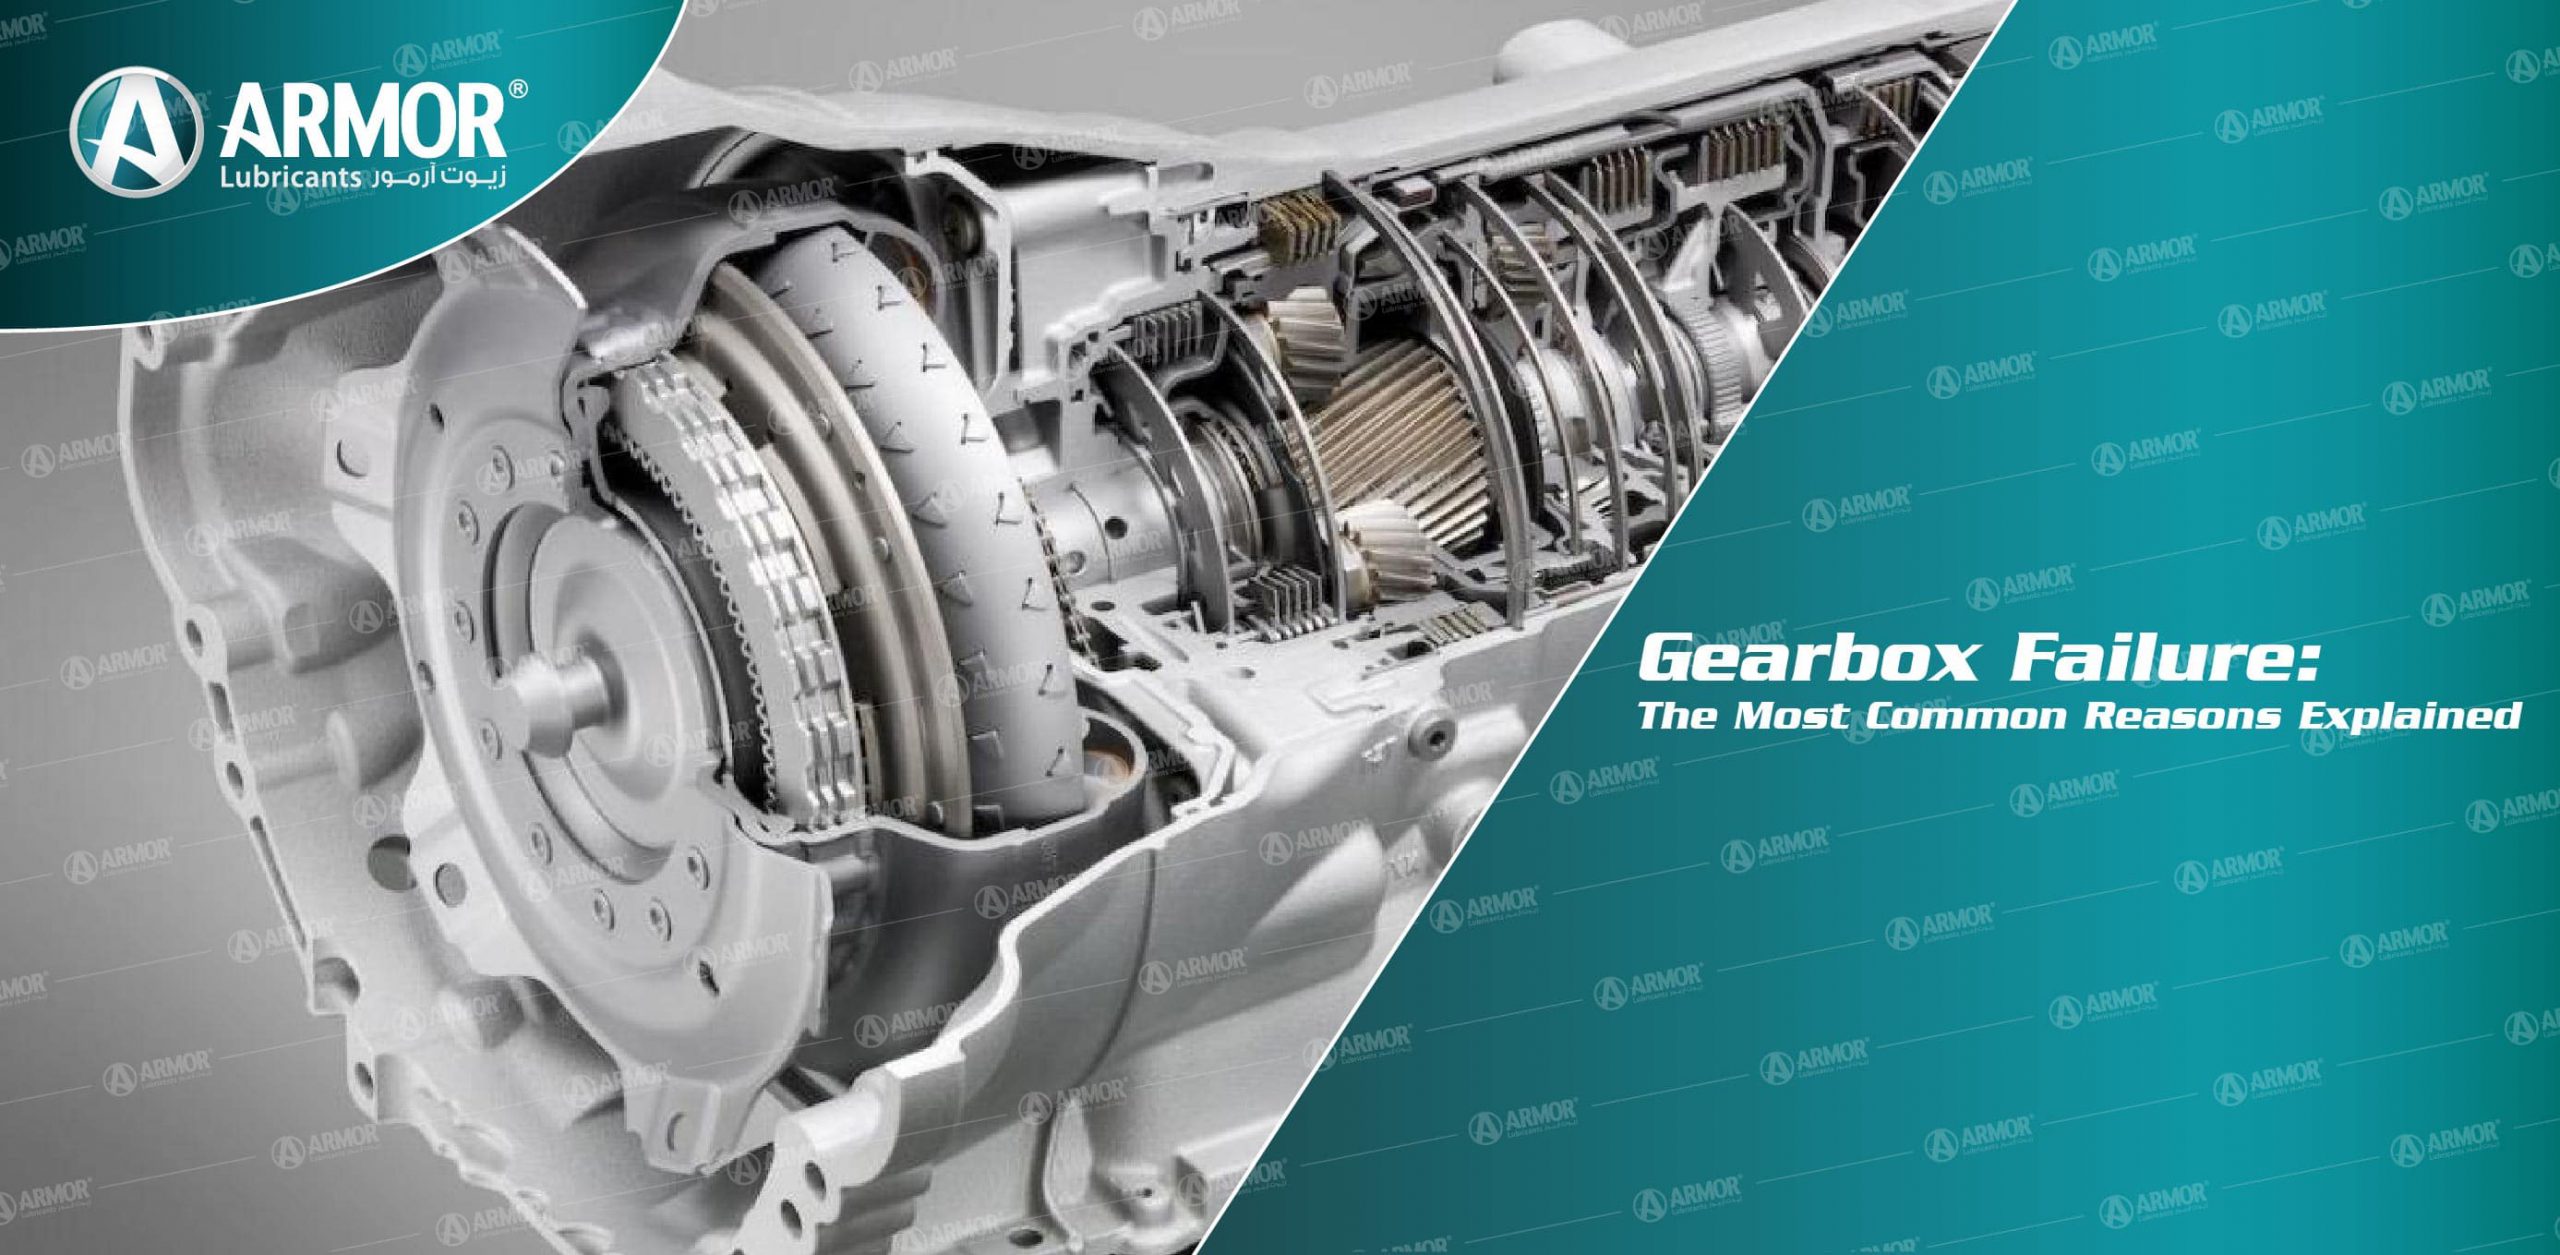 Gearbox Failure: 5 Most Common Reasons on How to Check Oil Level in Gearbox